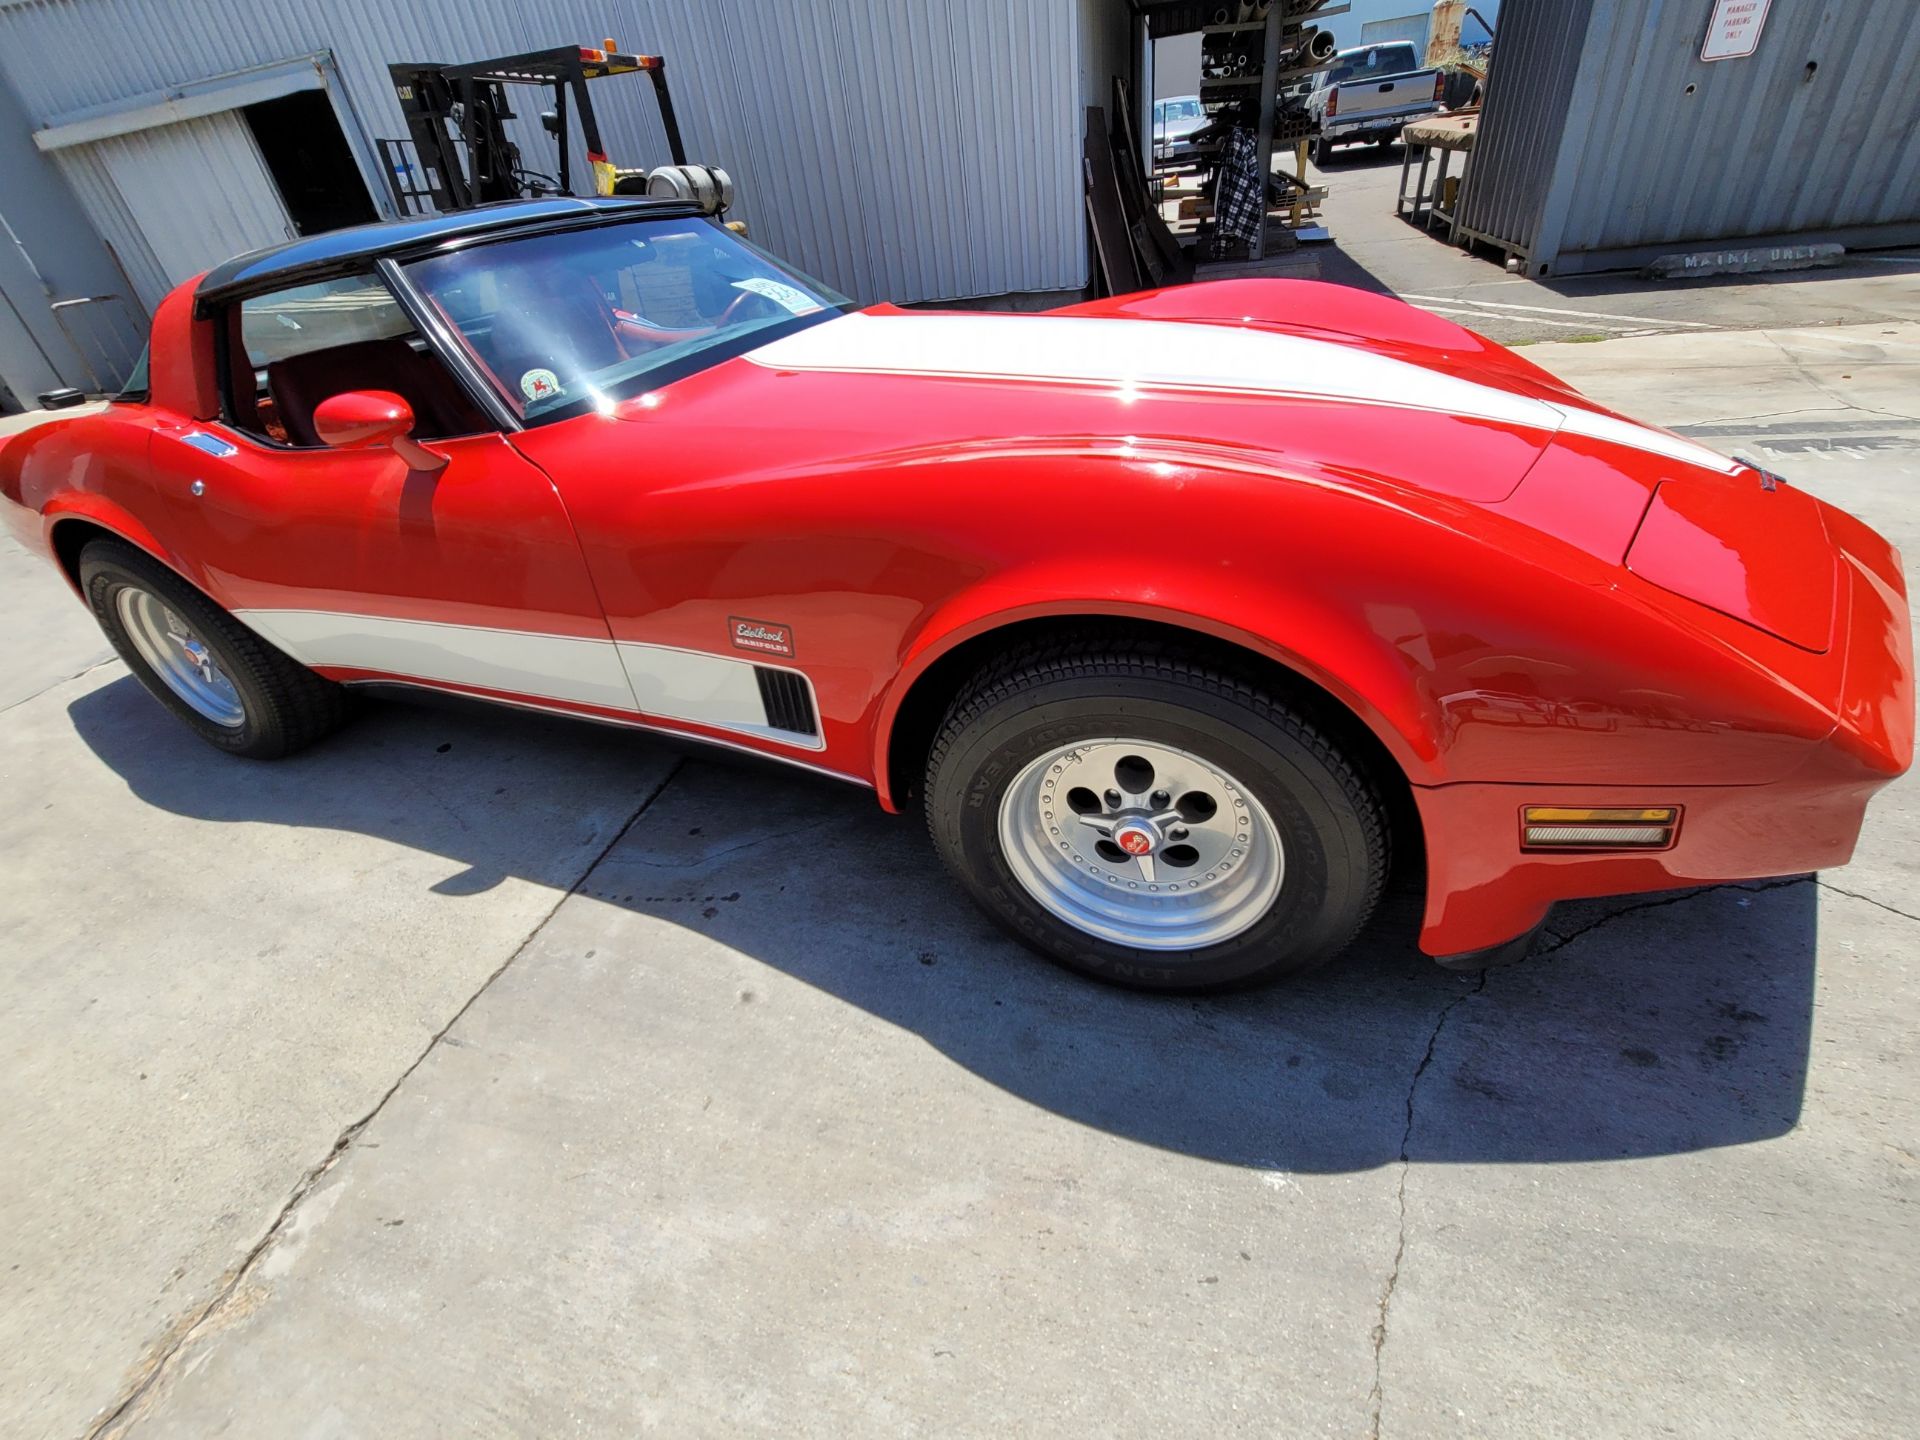 1980 CHEVROLET CORVETTE, WAS VIC EDELBROCK'S PERSONAL CAR BOUGHT FOR R&D, RED INTERIOR, TITLE ONLY. - Image 60 of 70